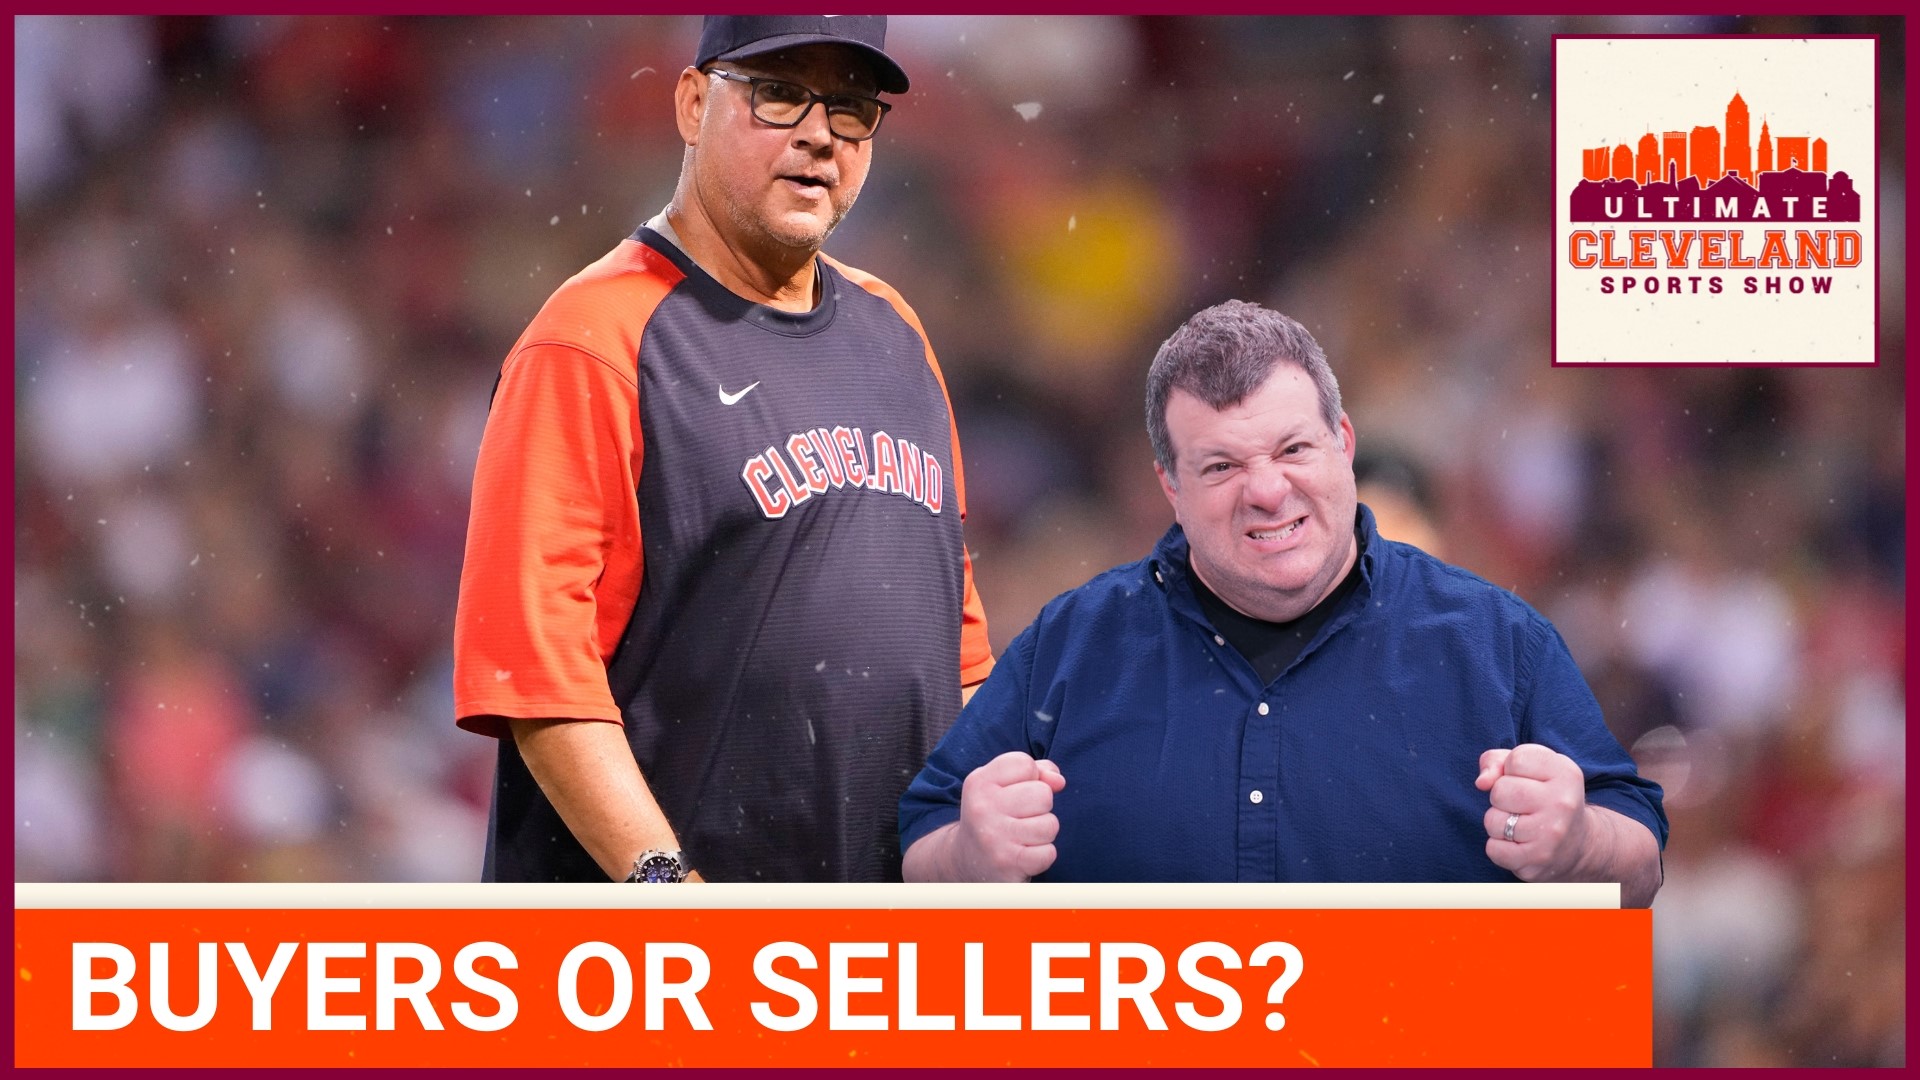 The MLB trade deadline is August 2nd, the Cleveland Guardians are 1.5 games out of first place, what would you do before the deadline to put them over the hump?